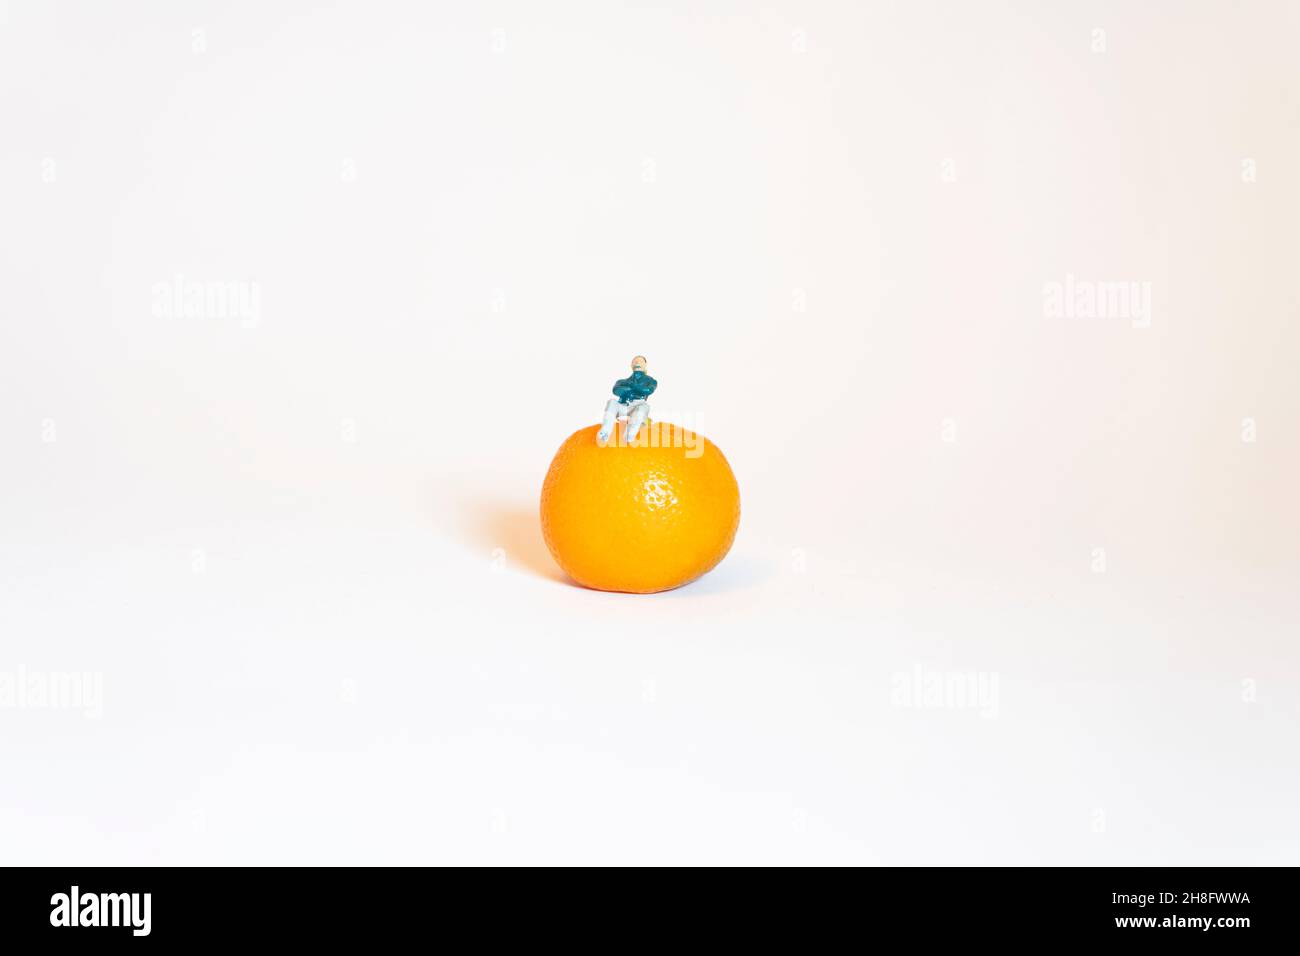 Miniature figure sitting on a miniature orange with white background. Farming is difficult in these days . Farmers have too much spend on seeds and st Stock Photo